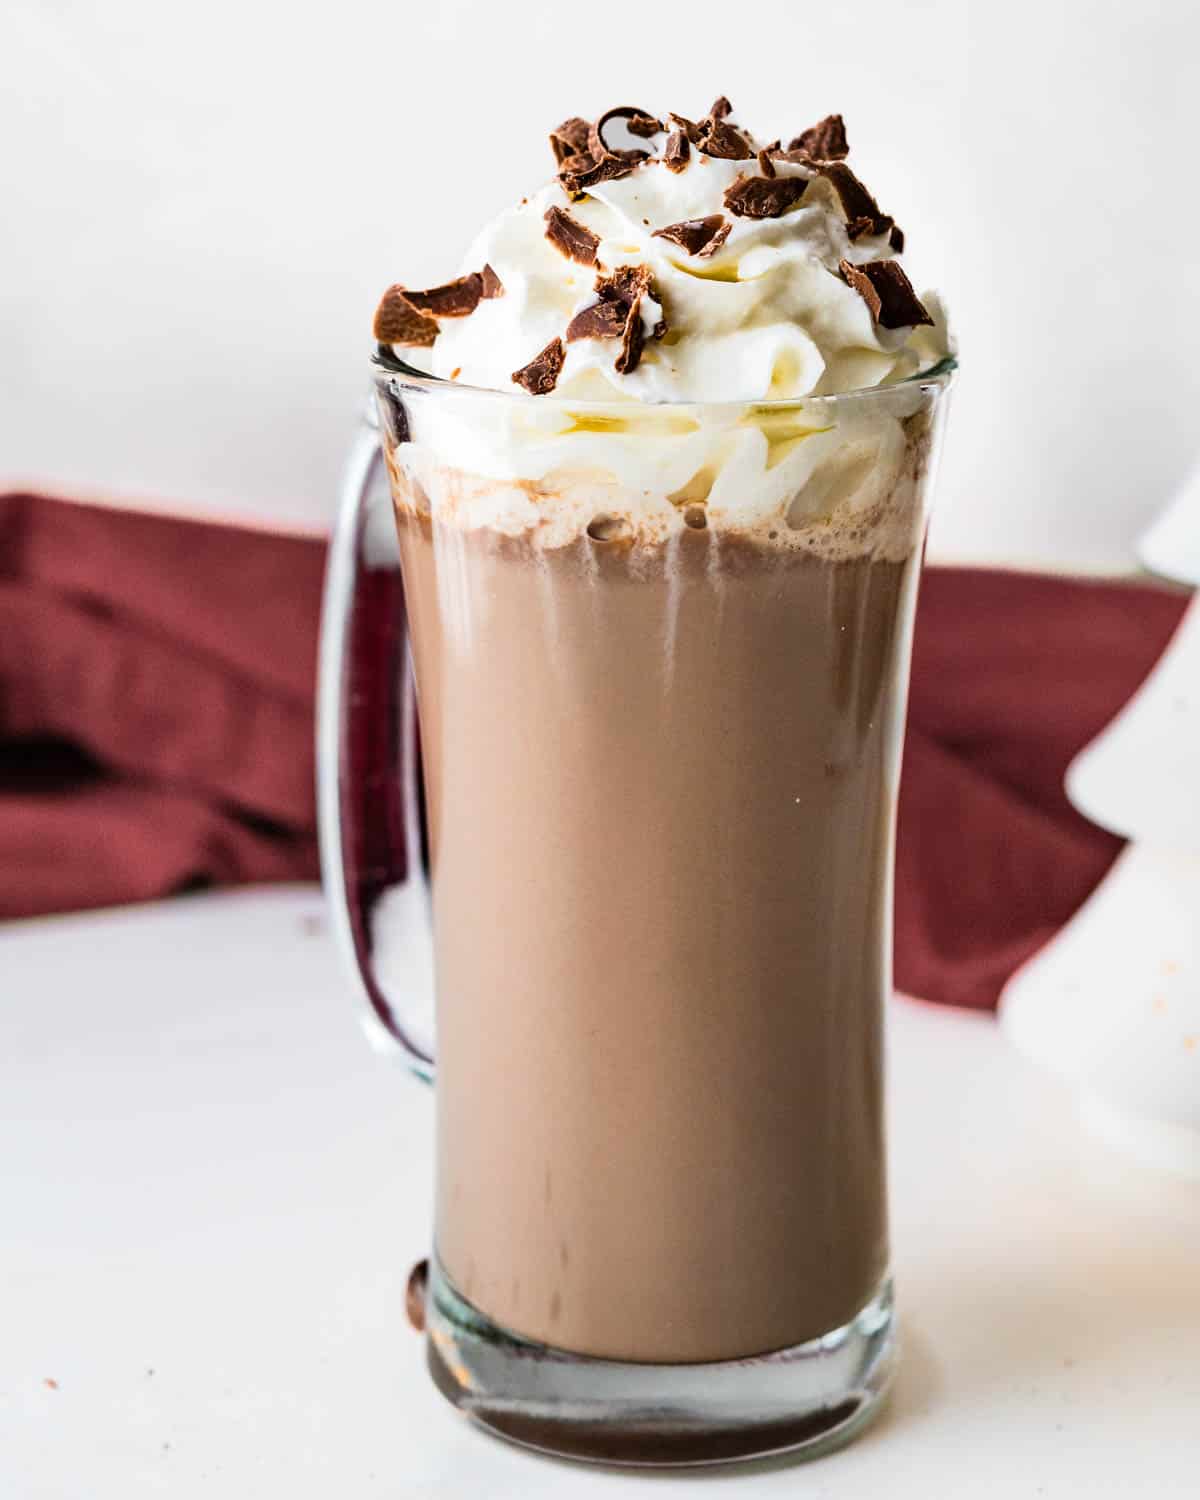 Serving the Bailey's Irish cream coffee in a glass mug with whipped cream and chocolate shavings.